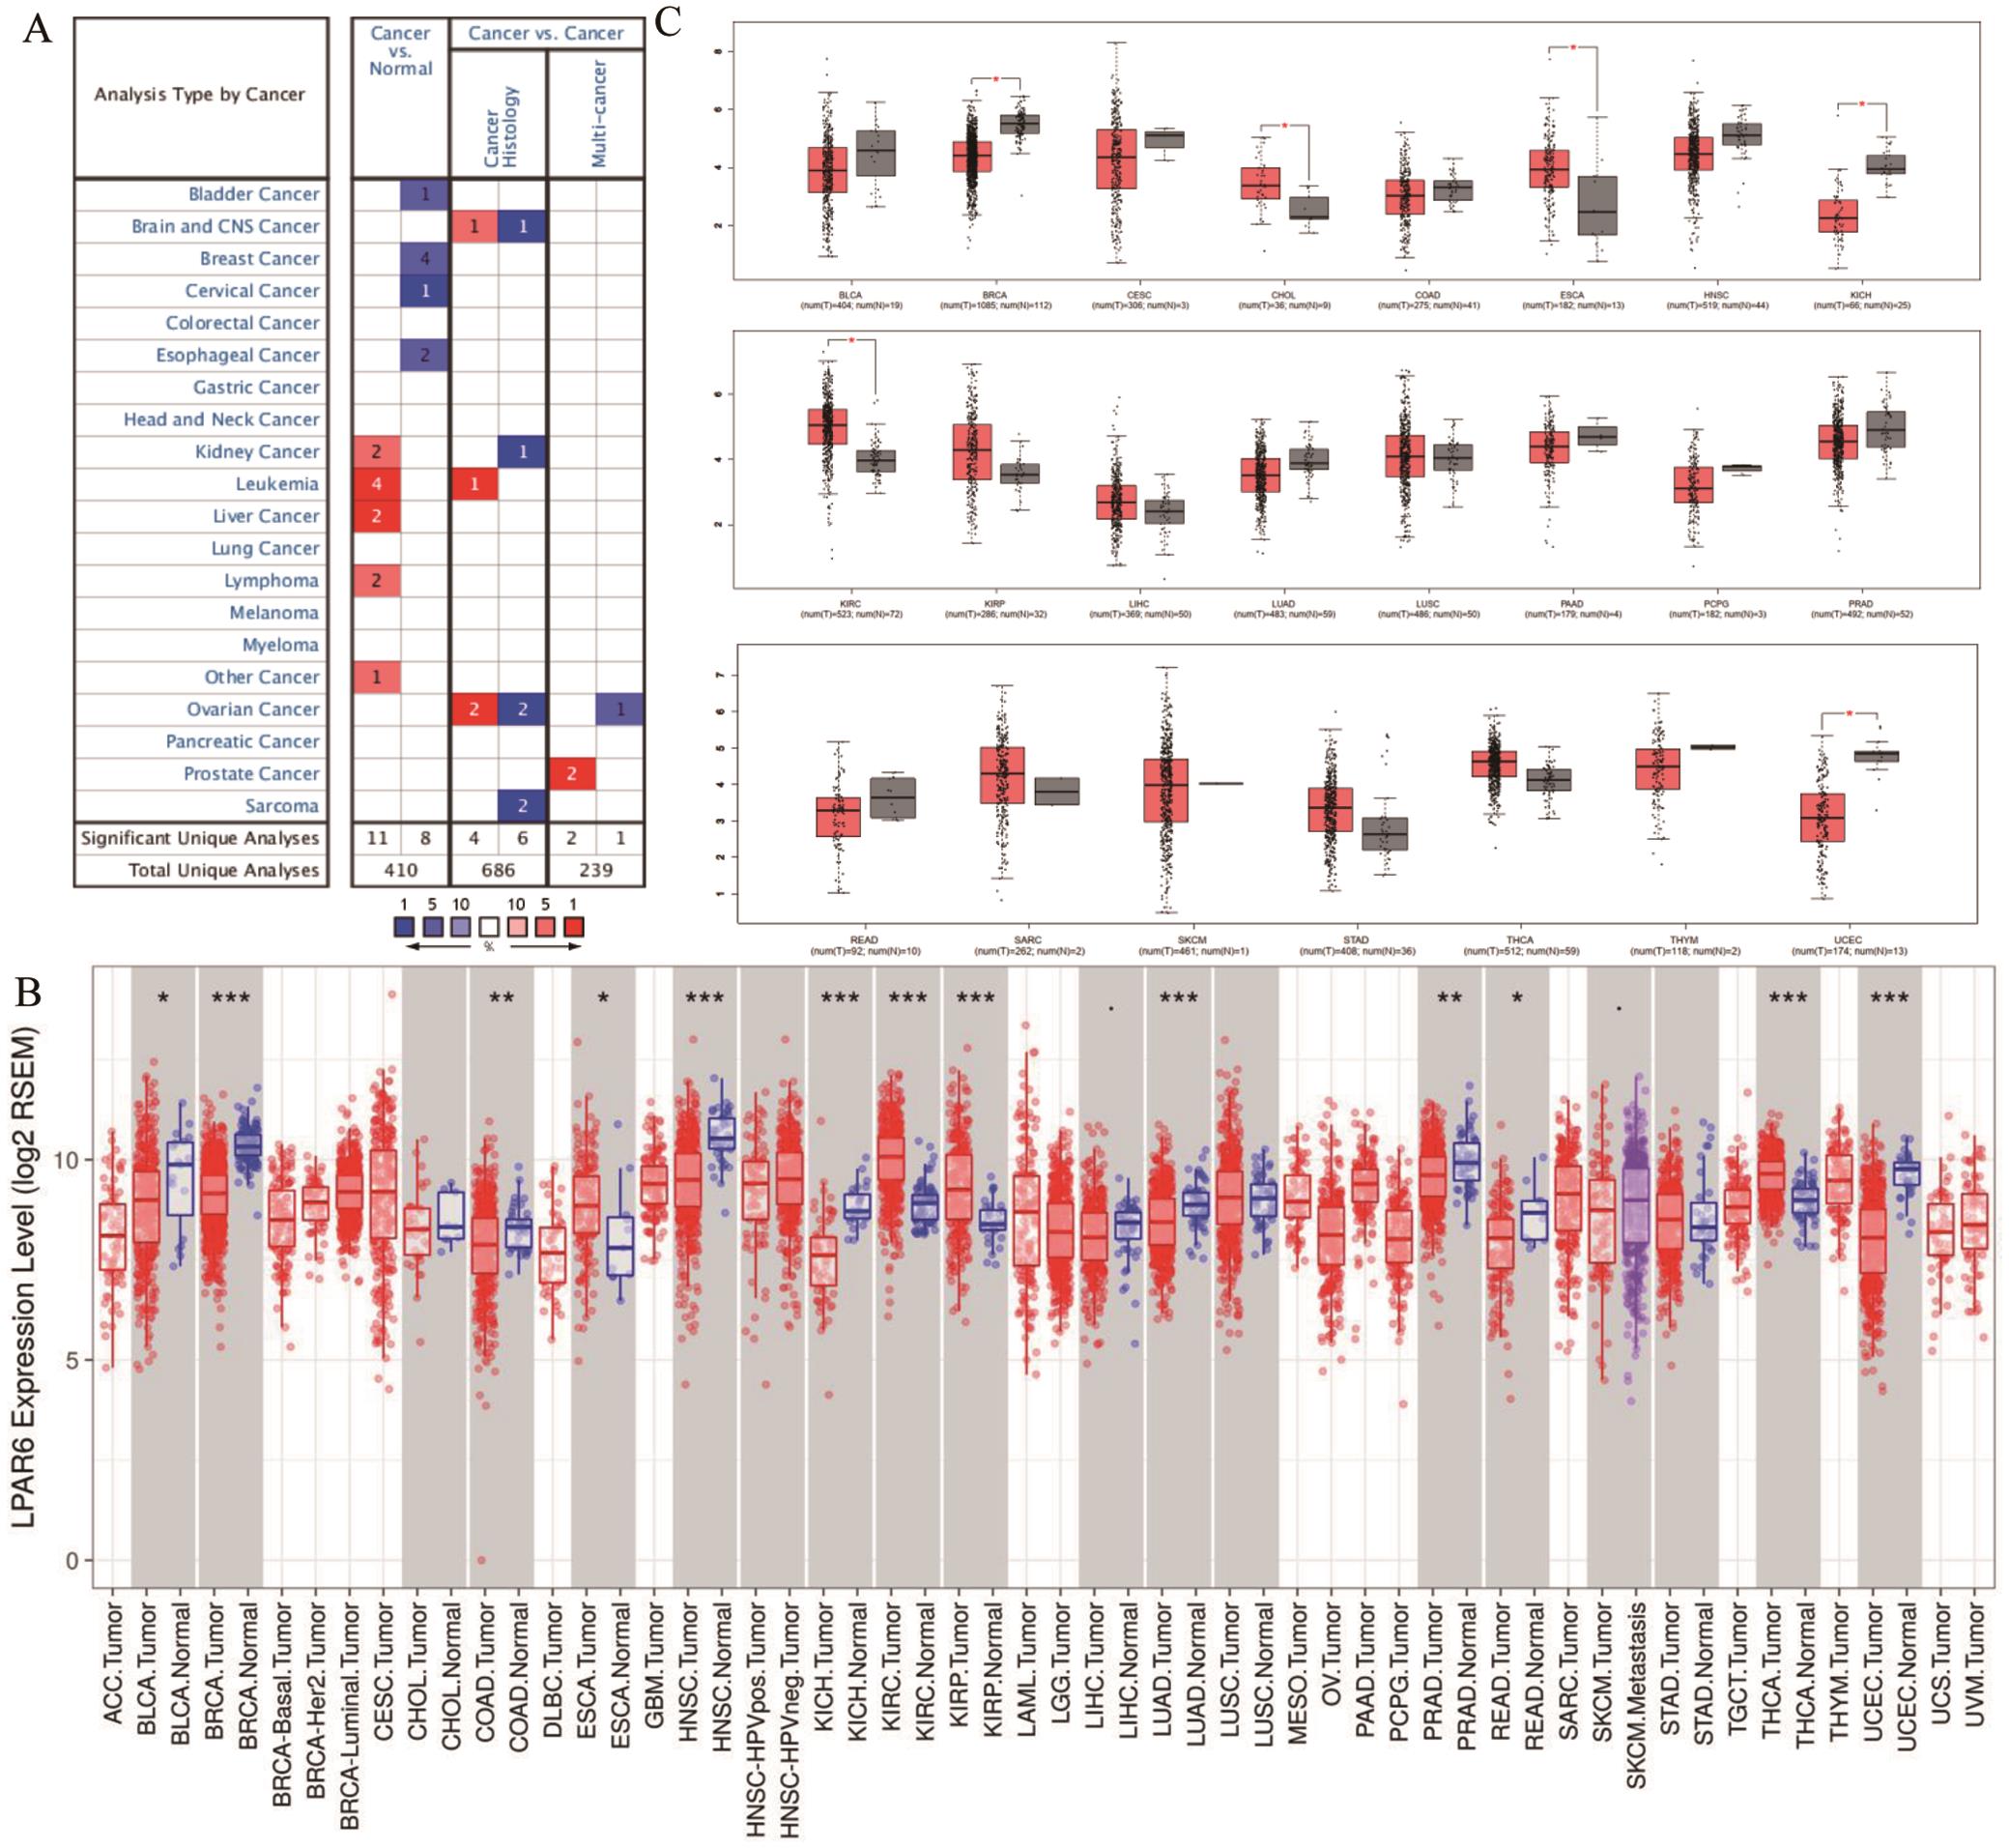 LPAR6 mRNA expression levels in different types of human cancers in different databases.